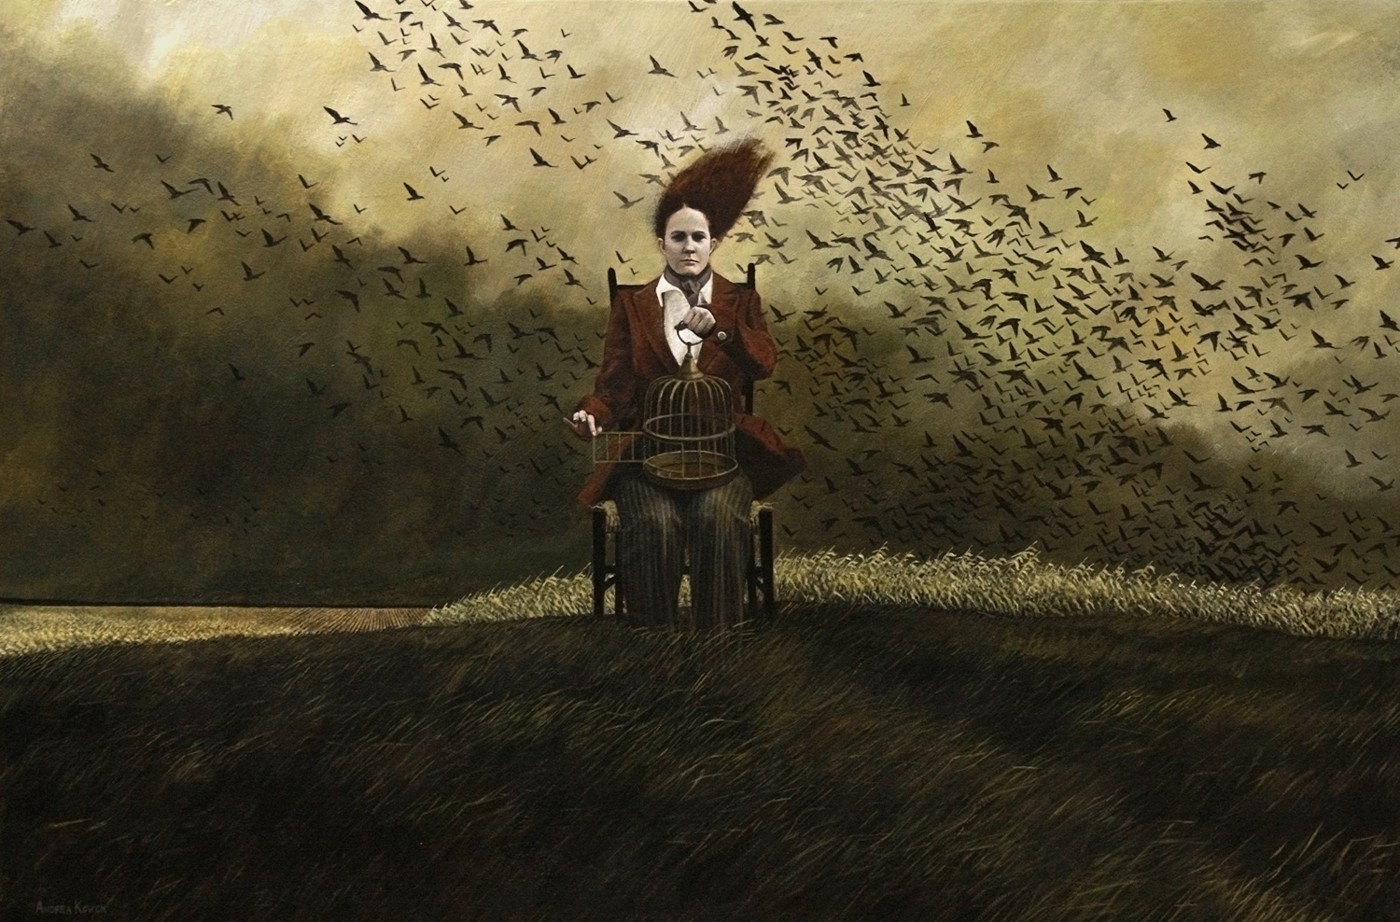 Andrea Kowch gothic rural witchcraft paintings